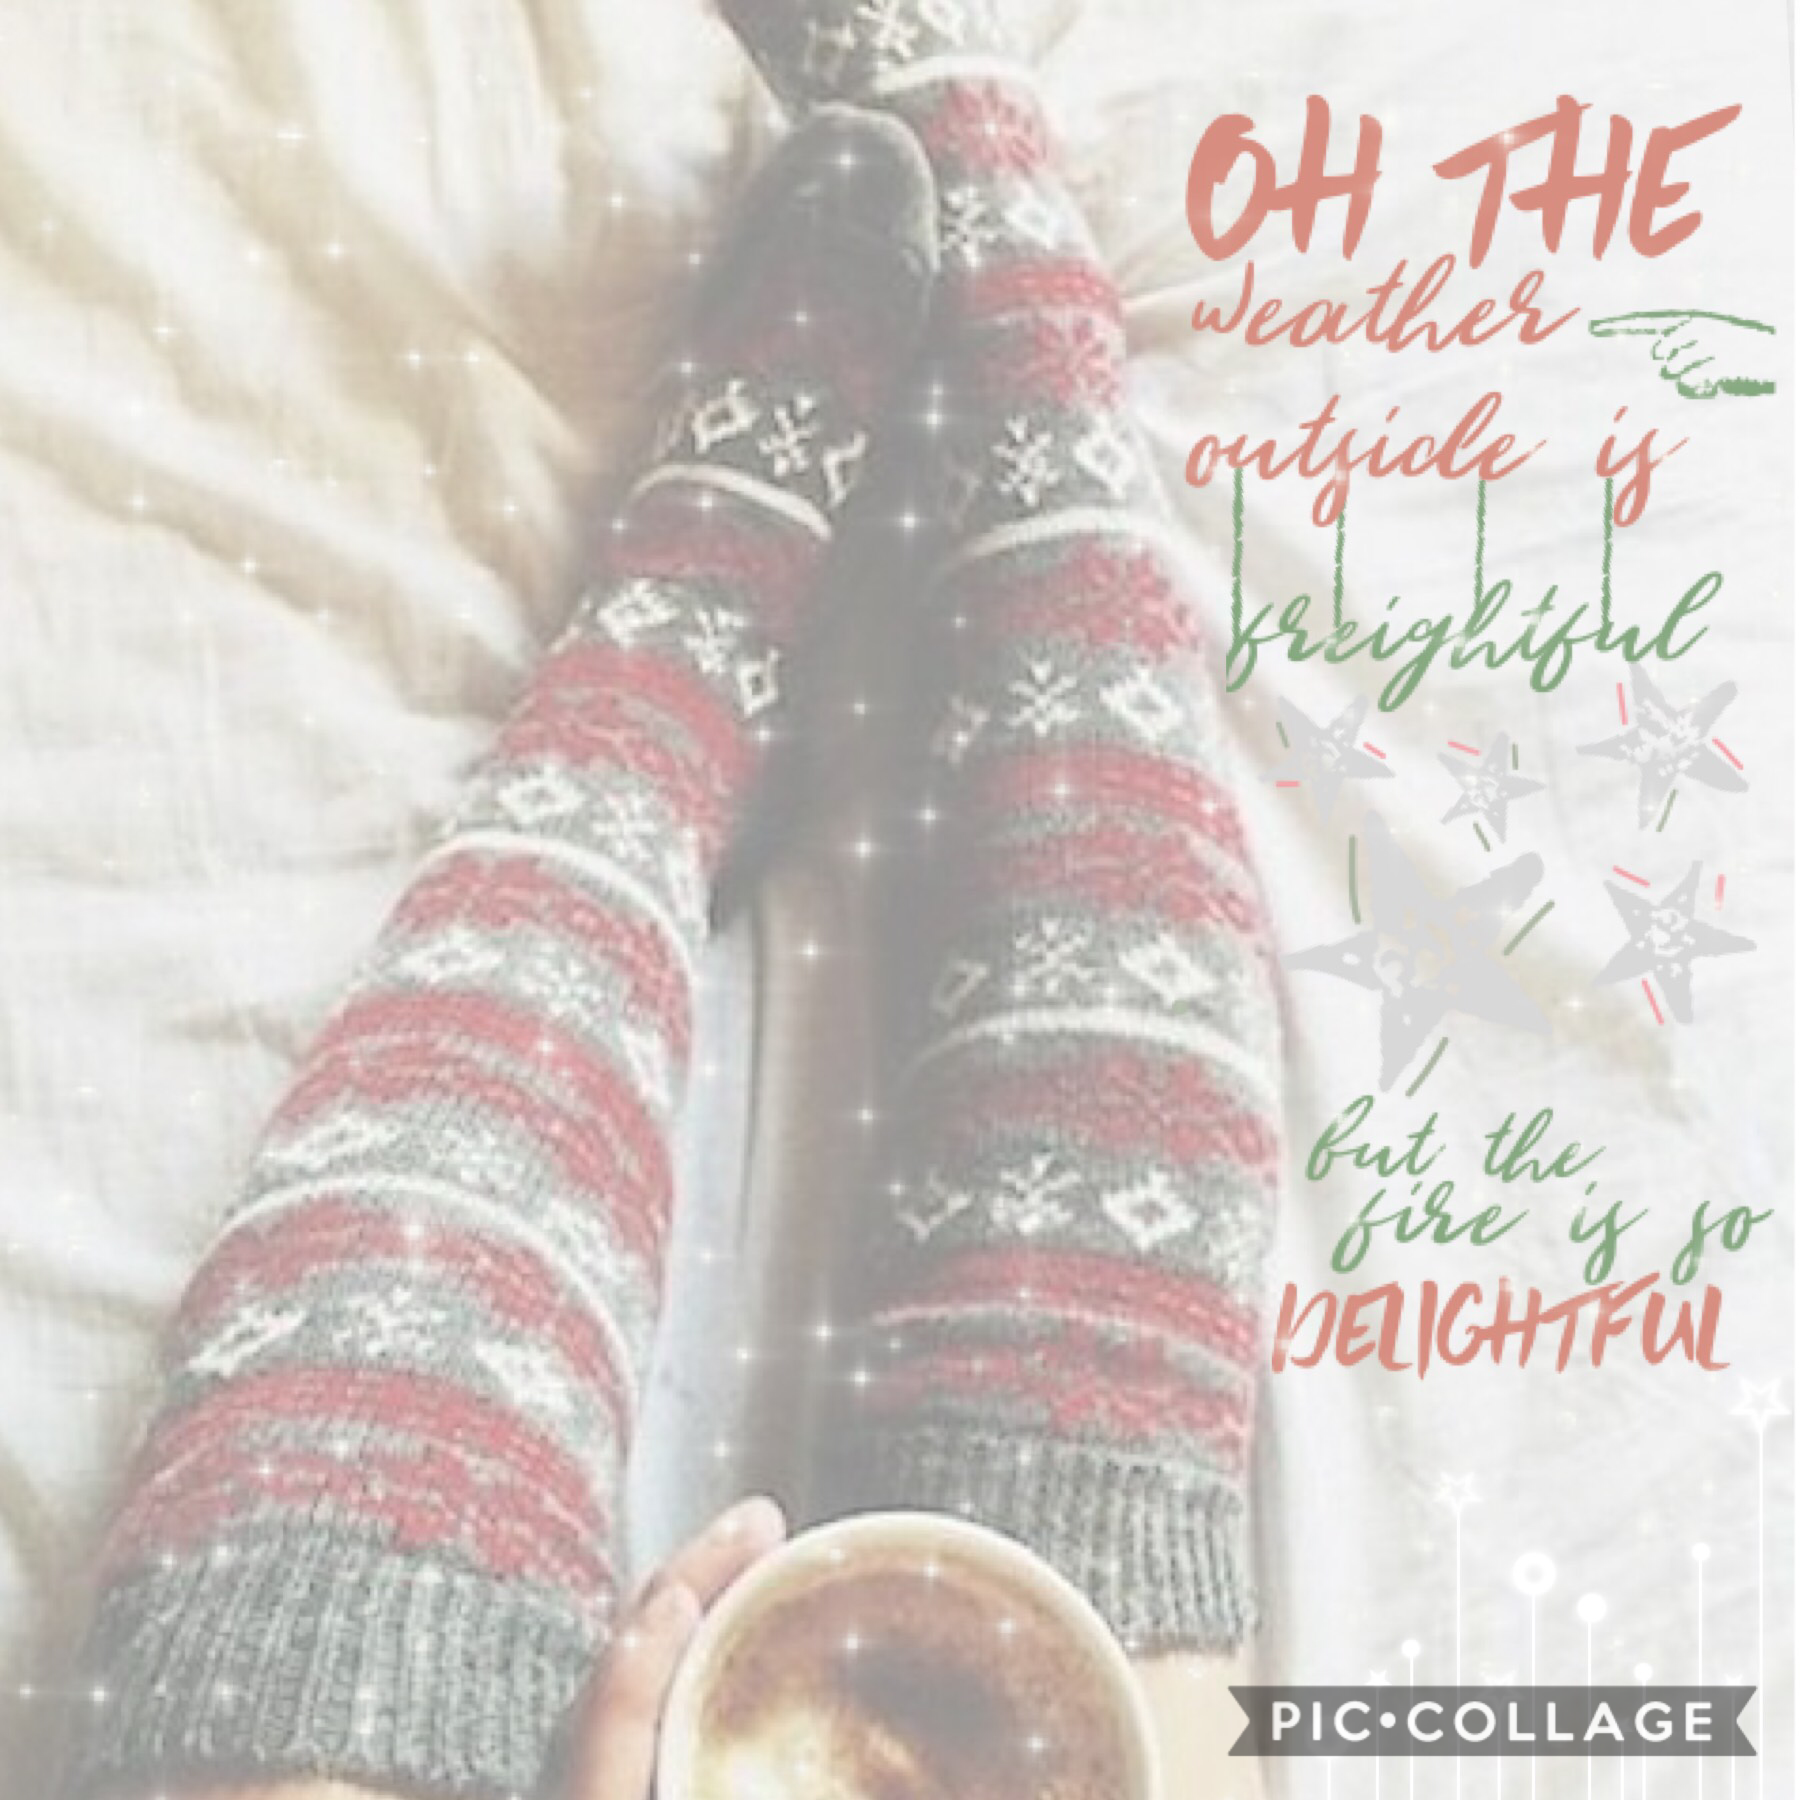 tap!!🎄🎄
AHHHHHHHHHHHHHHHH
MY FIRST 2018 CRISTMAS EDIT!!!
Ok, I’m done now😂
QOTD: Does it snow much where you live?🌨🌨🌨🌨🌨🌨🌨🌨
AOTD : No, but it did last year!❄️